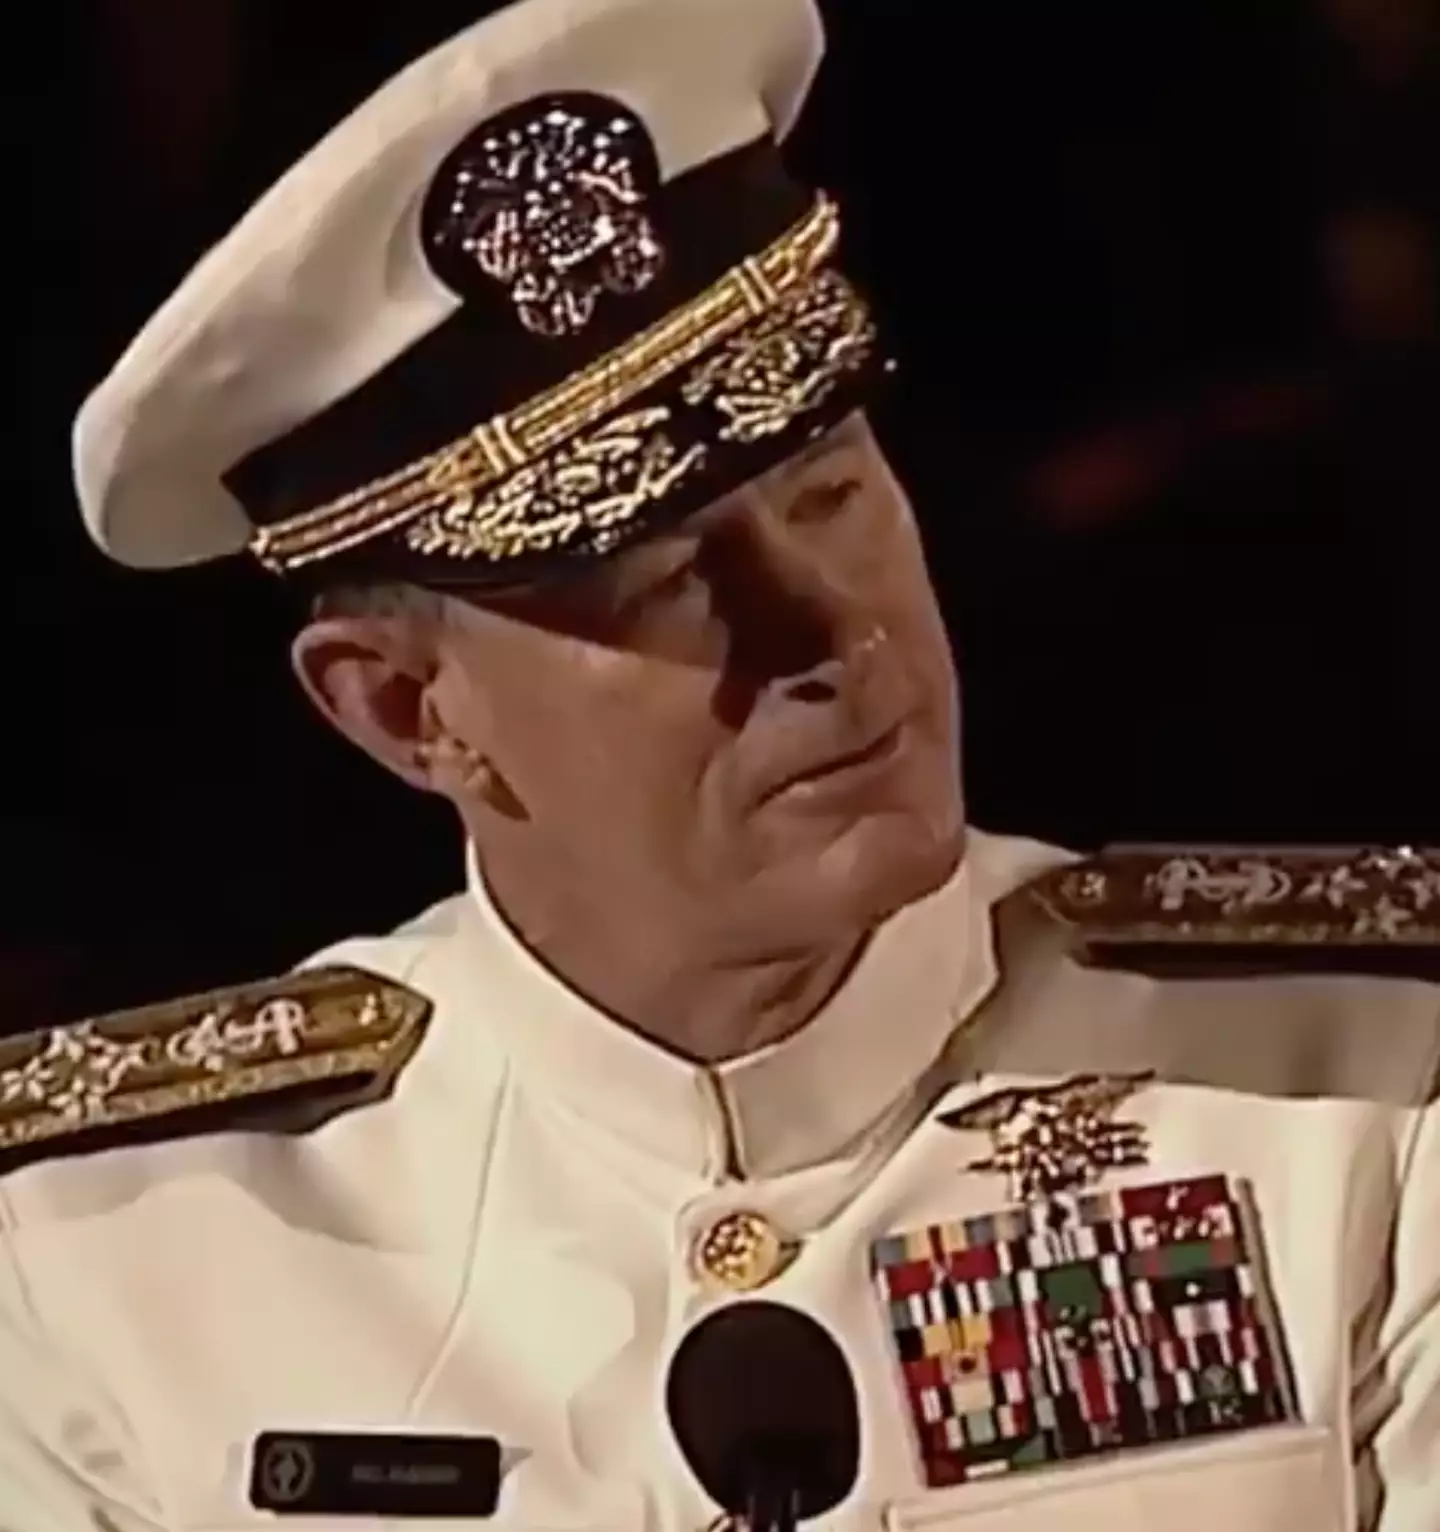 Admiral McRaven shared some words of wisdom with graduates. (Texas Exes)